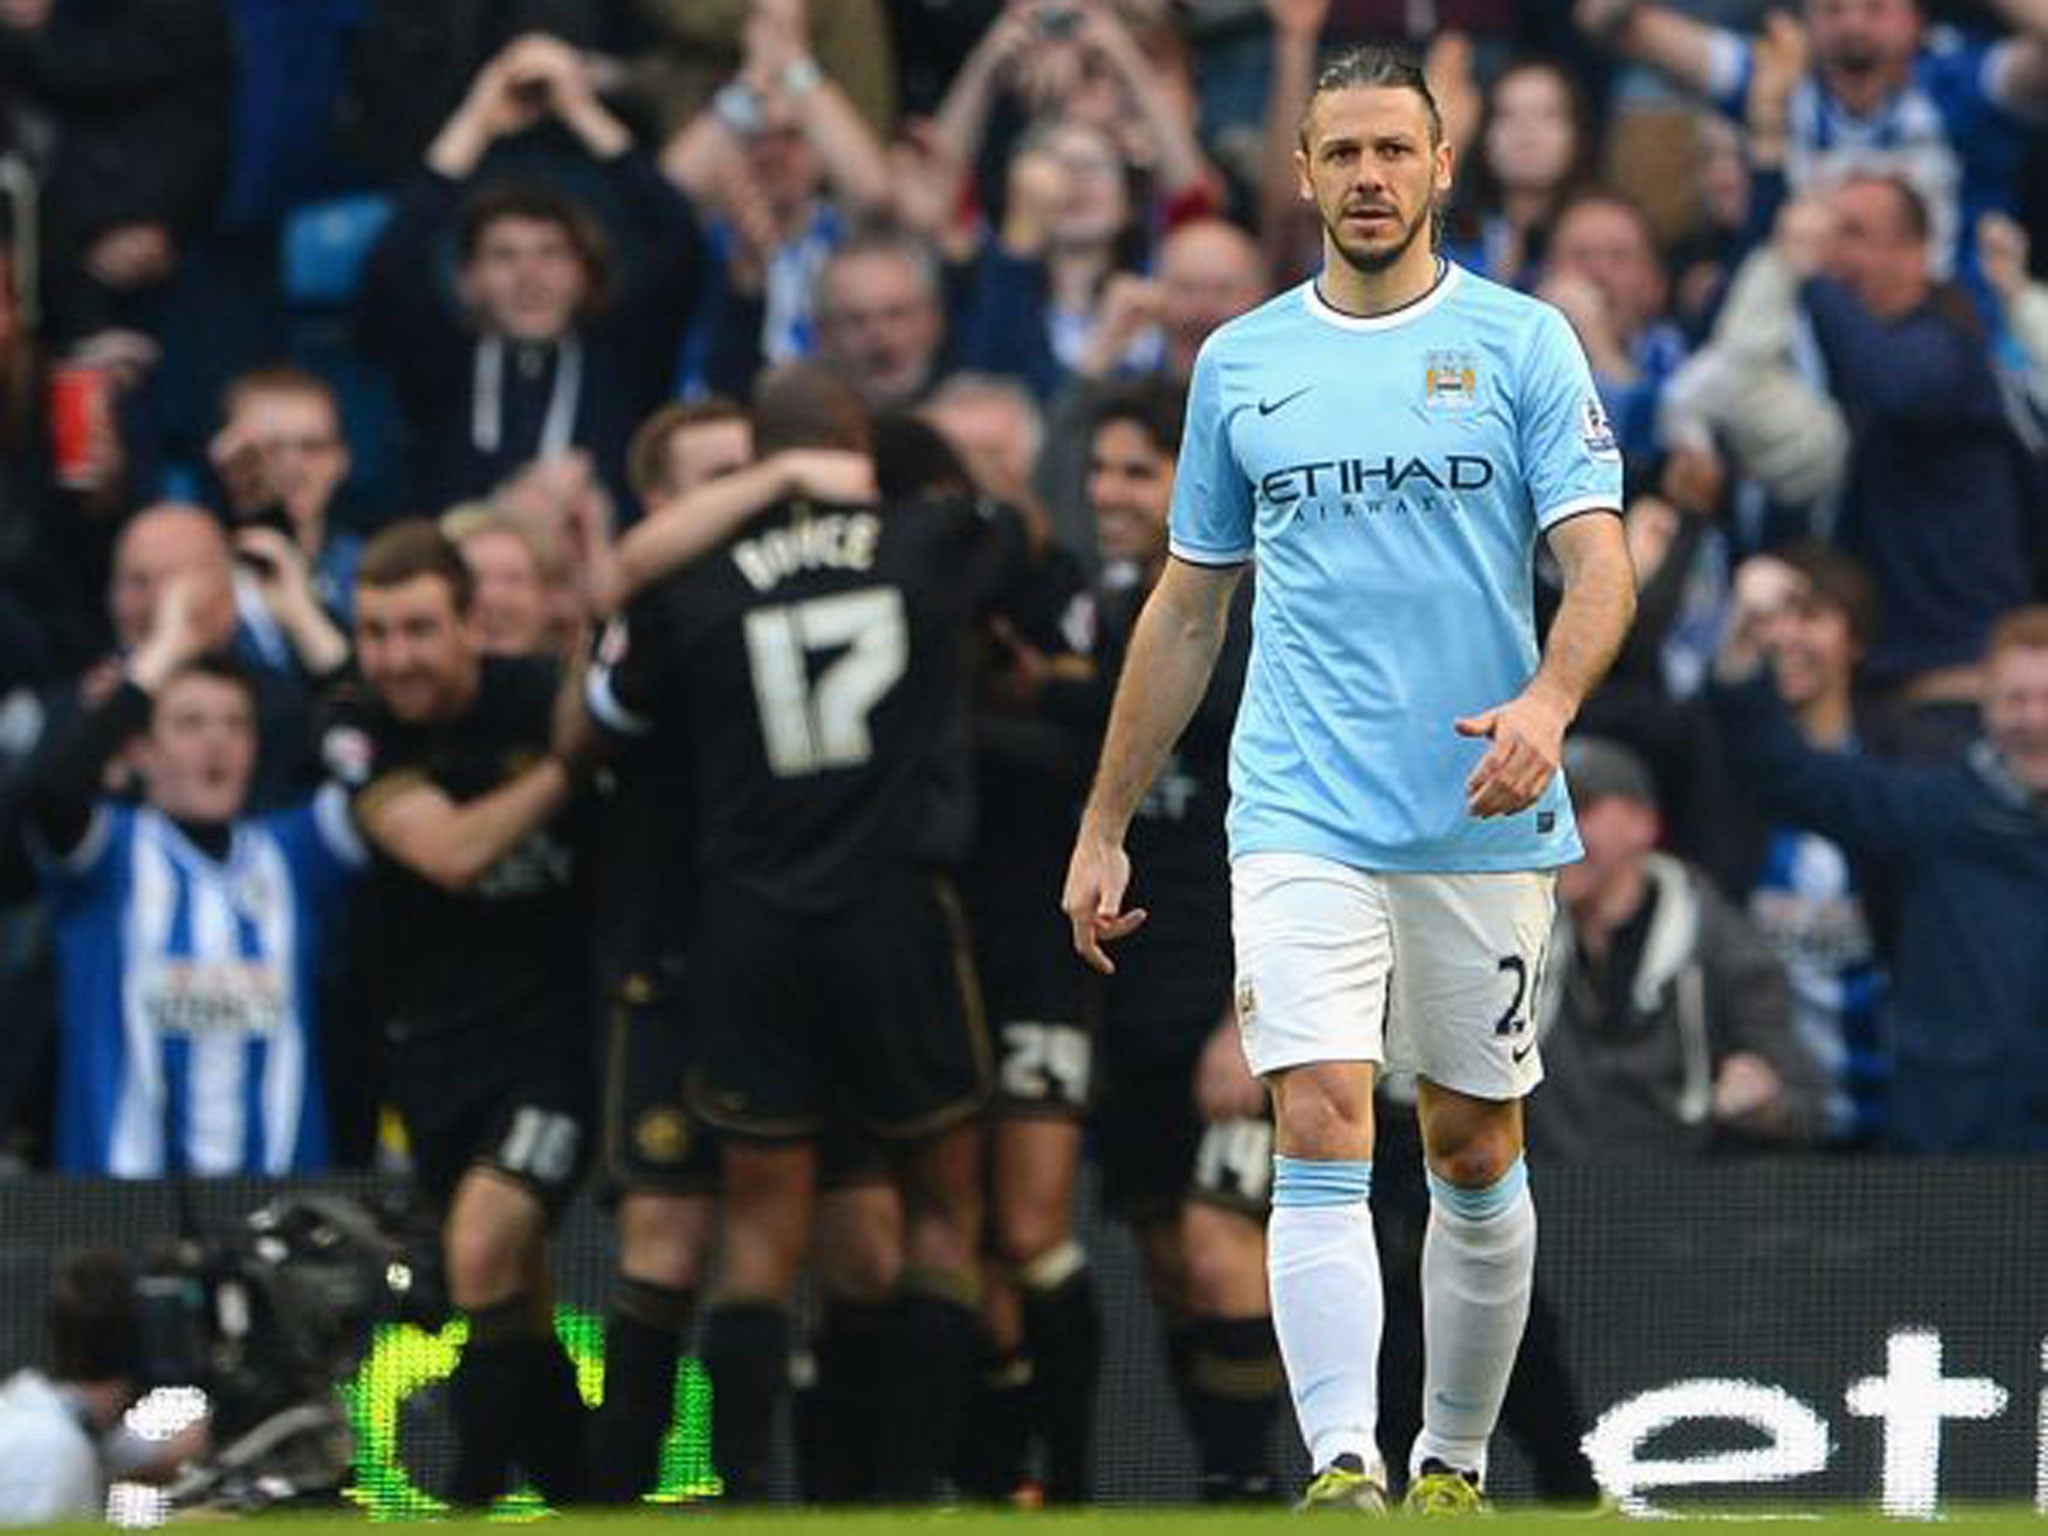 High-profile mistakes have made it a tough first season in England for Martin Demichelis